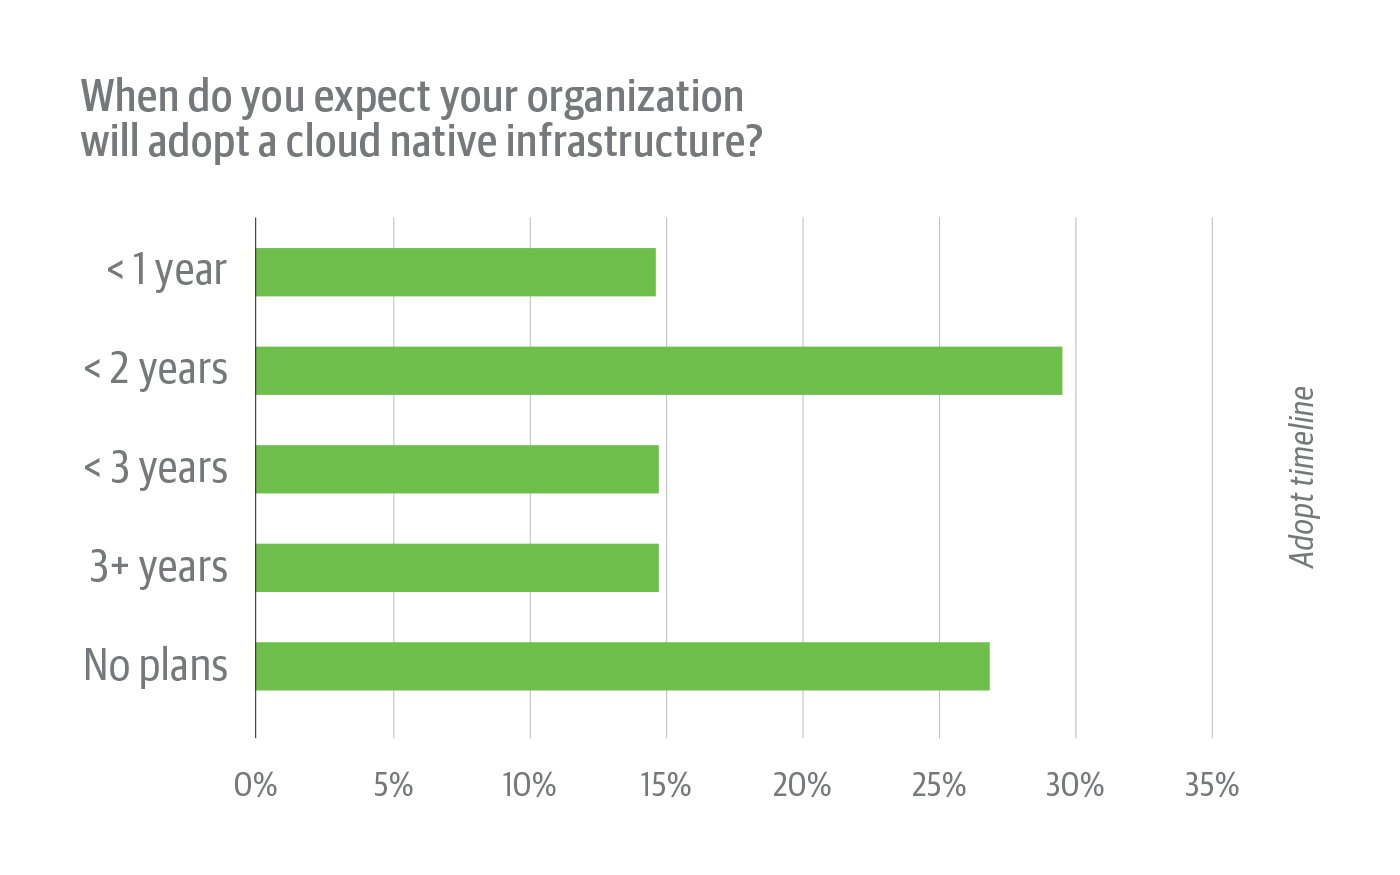 When survey respondents whose organizations have not adopted cloud native infrastructure expect to implement cloud native.